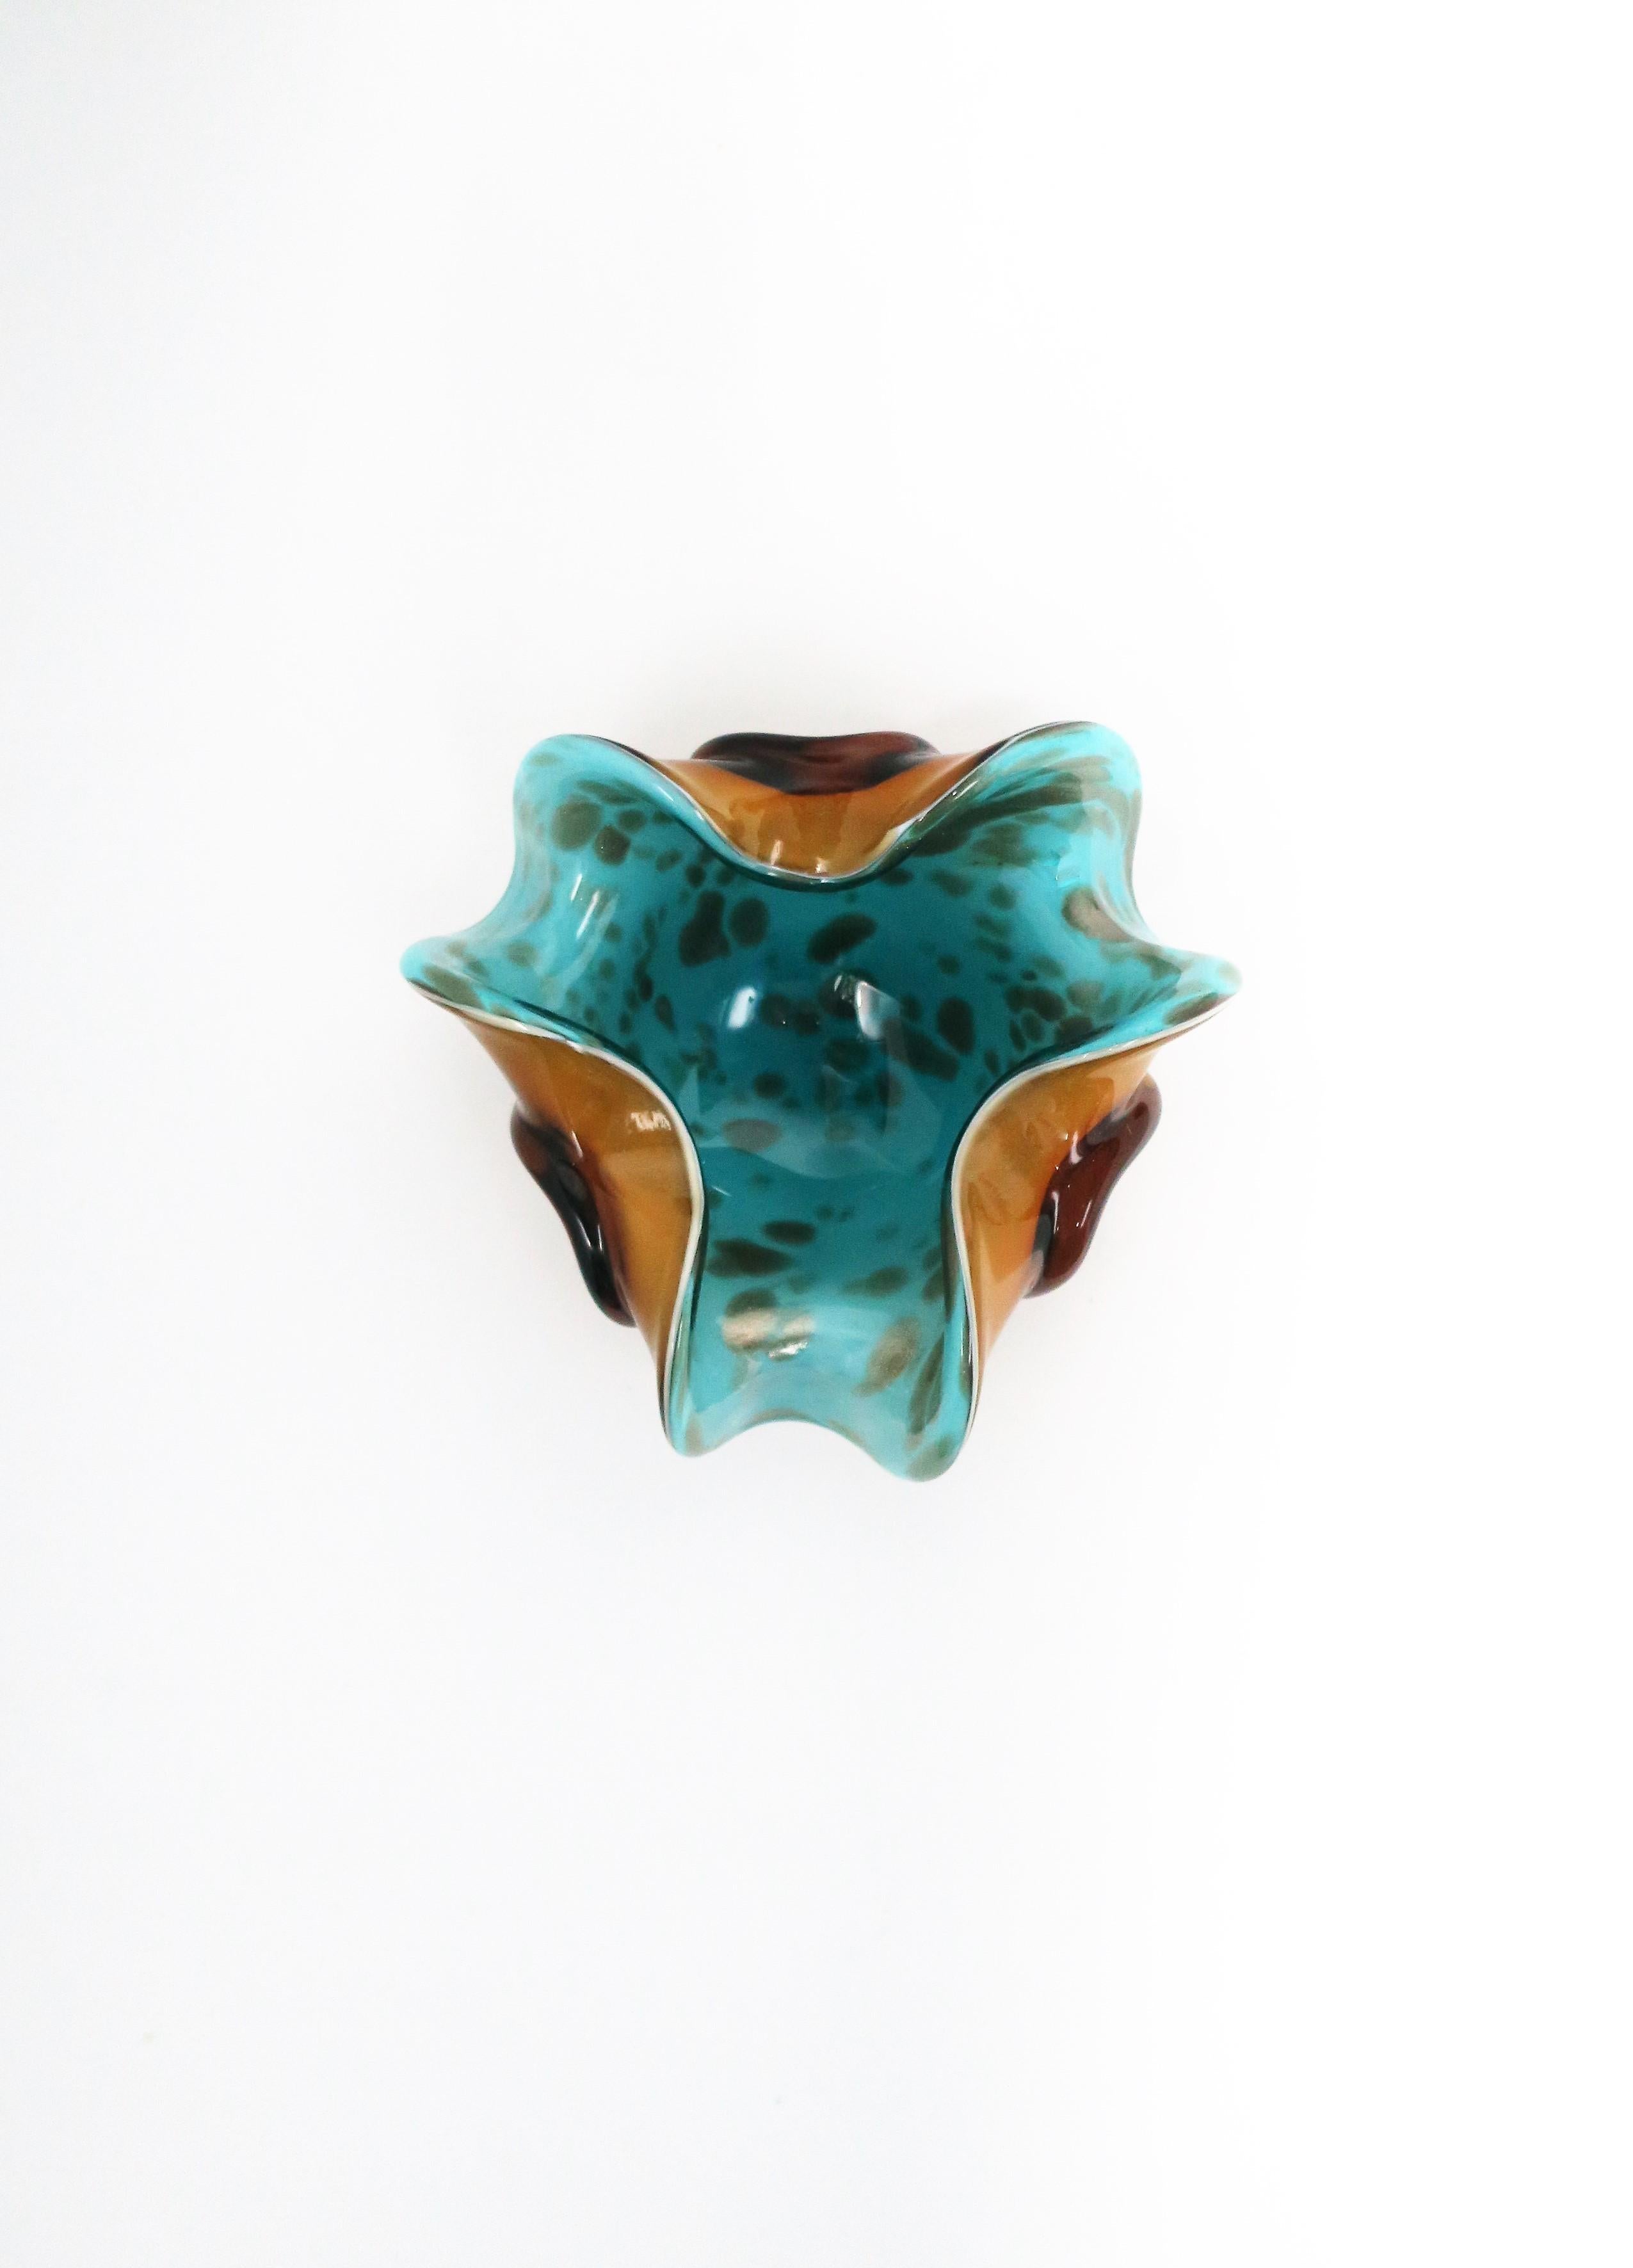 A beautiful and substantial mid-20th century Italian Murano turquoise blue, shimmering gold/copper, and amber colored art glass bowl, 1960s, Italy. Bowls' dimensions: 6.75